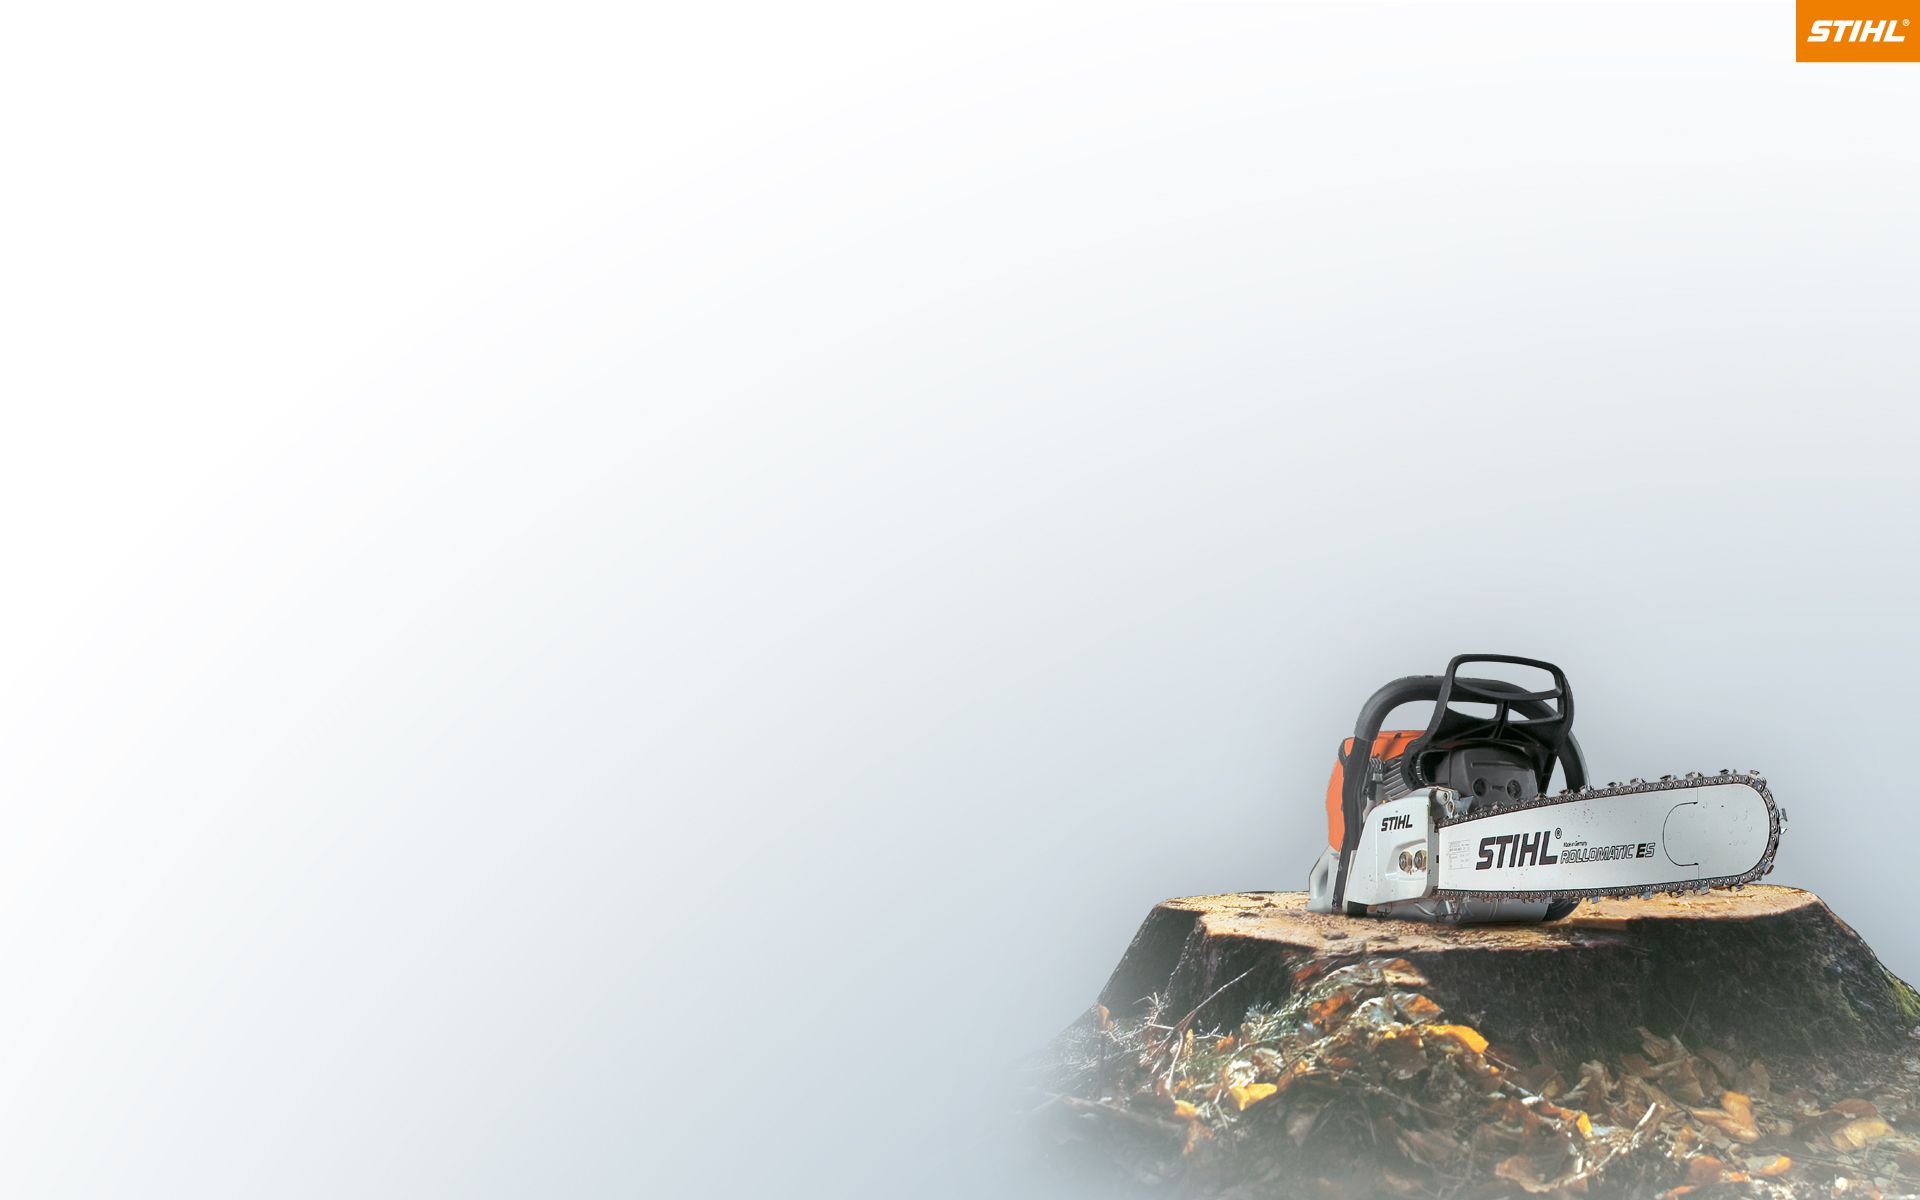 Our Wallpaper for more STIHL on your screen